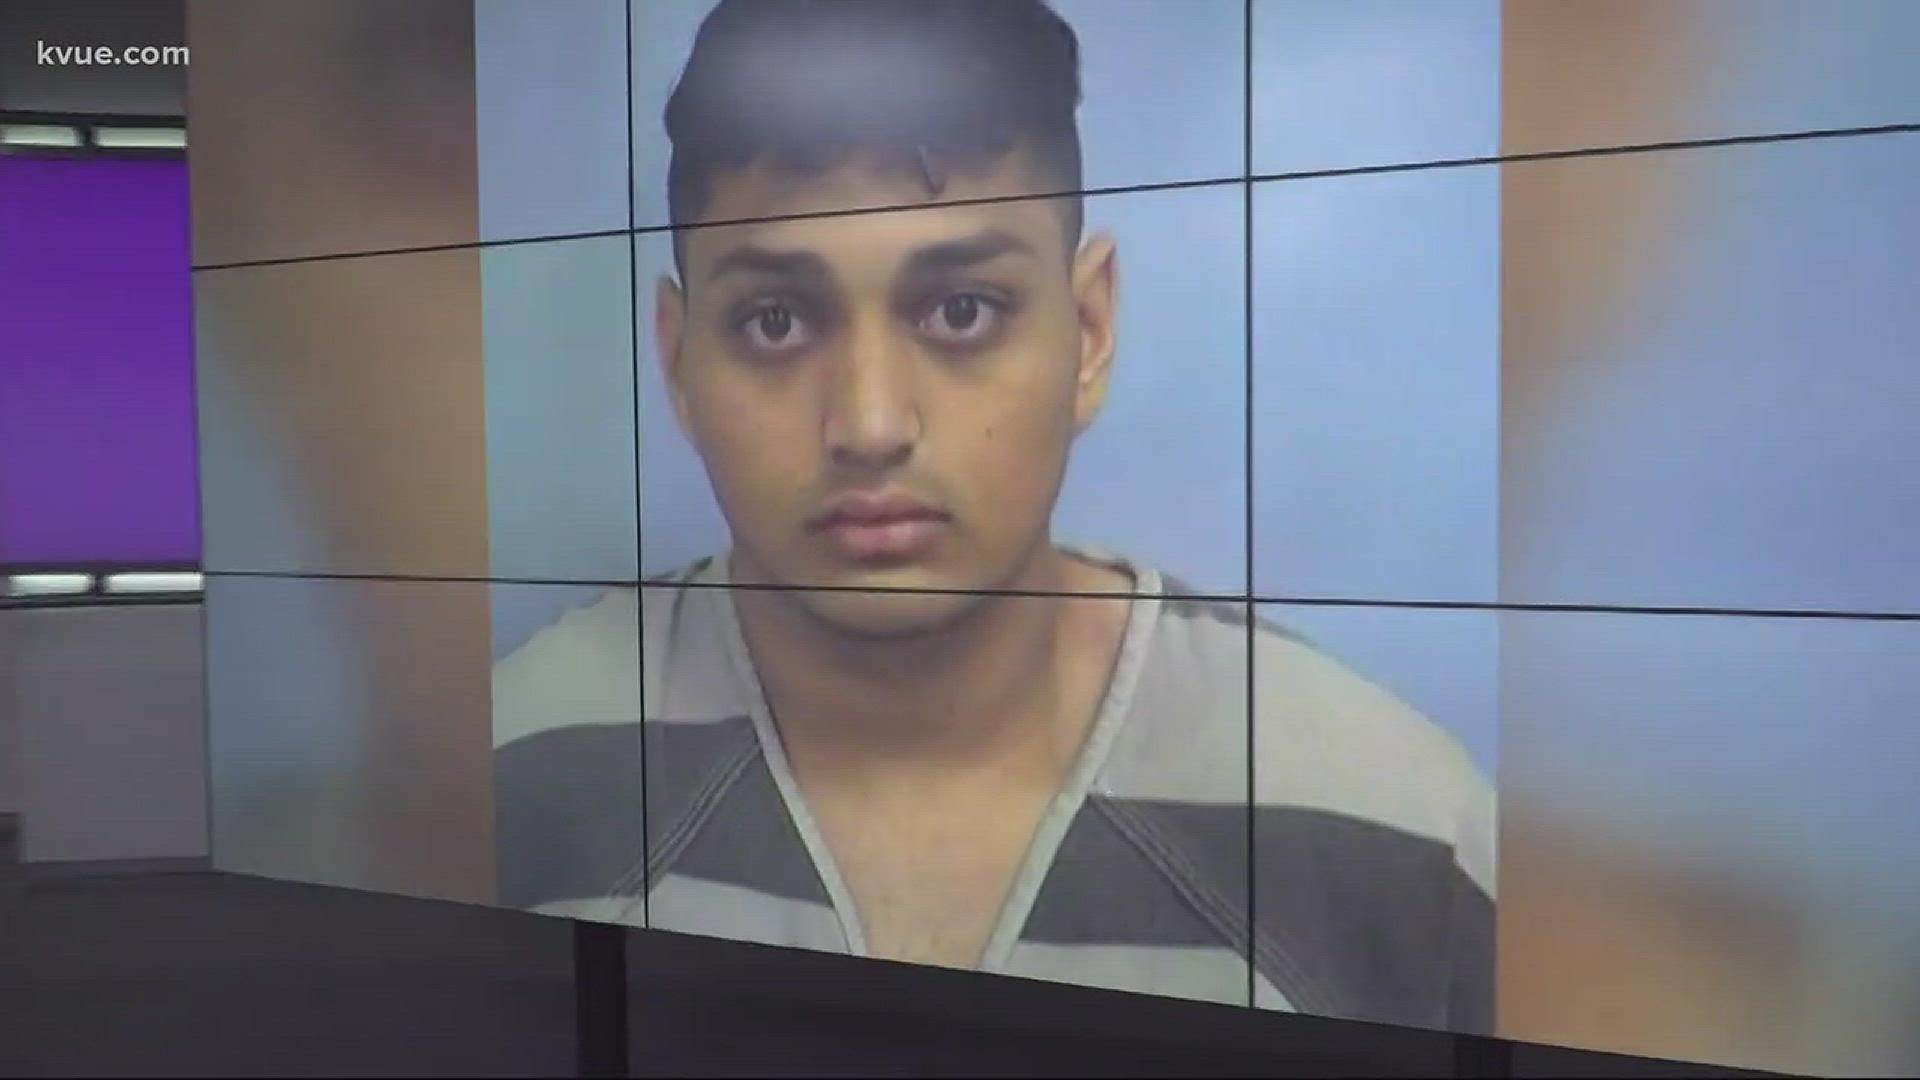 We have new exclusive information in the threat at Akins High School last week. Prosecutors are working right now to add restrictions that a 17-year-old suspect must follow if he remains out of jail on bond.